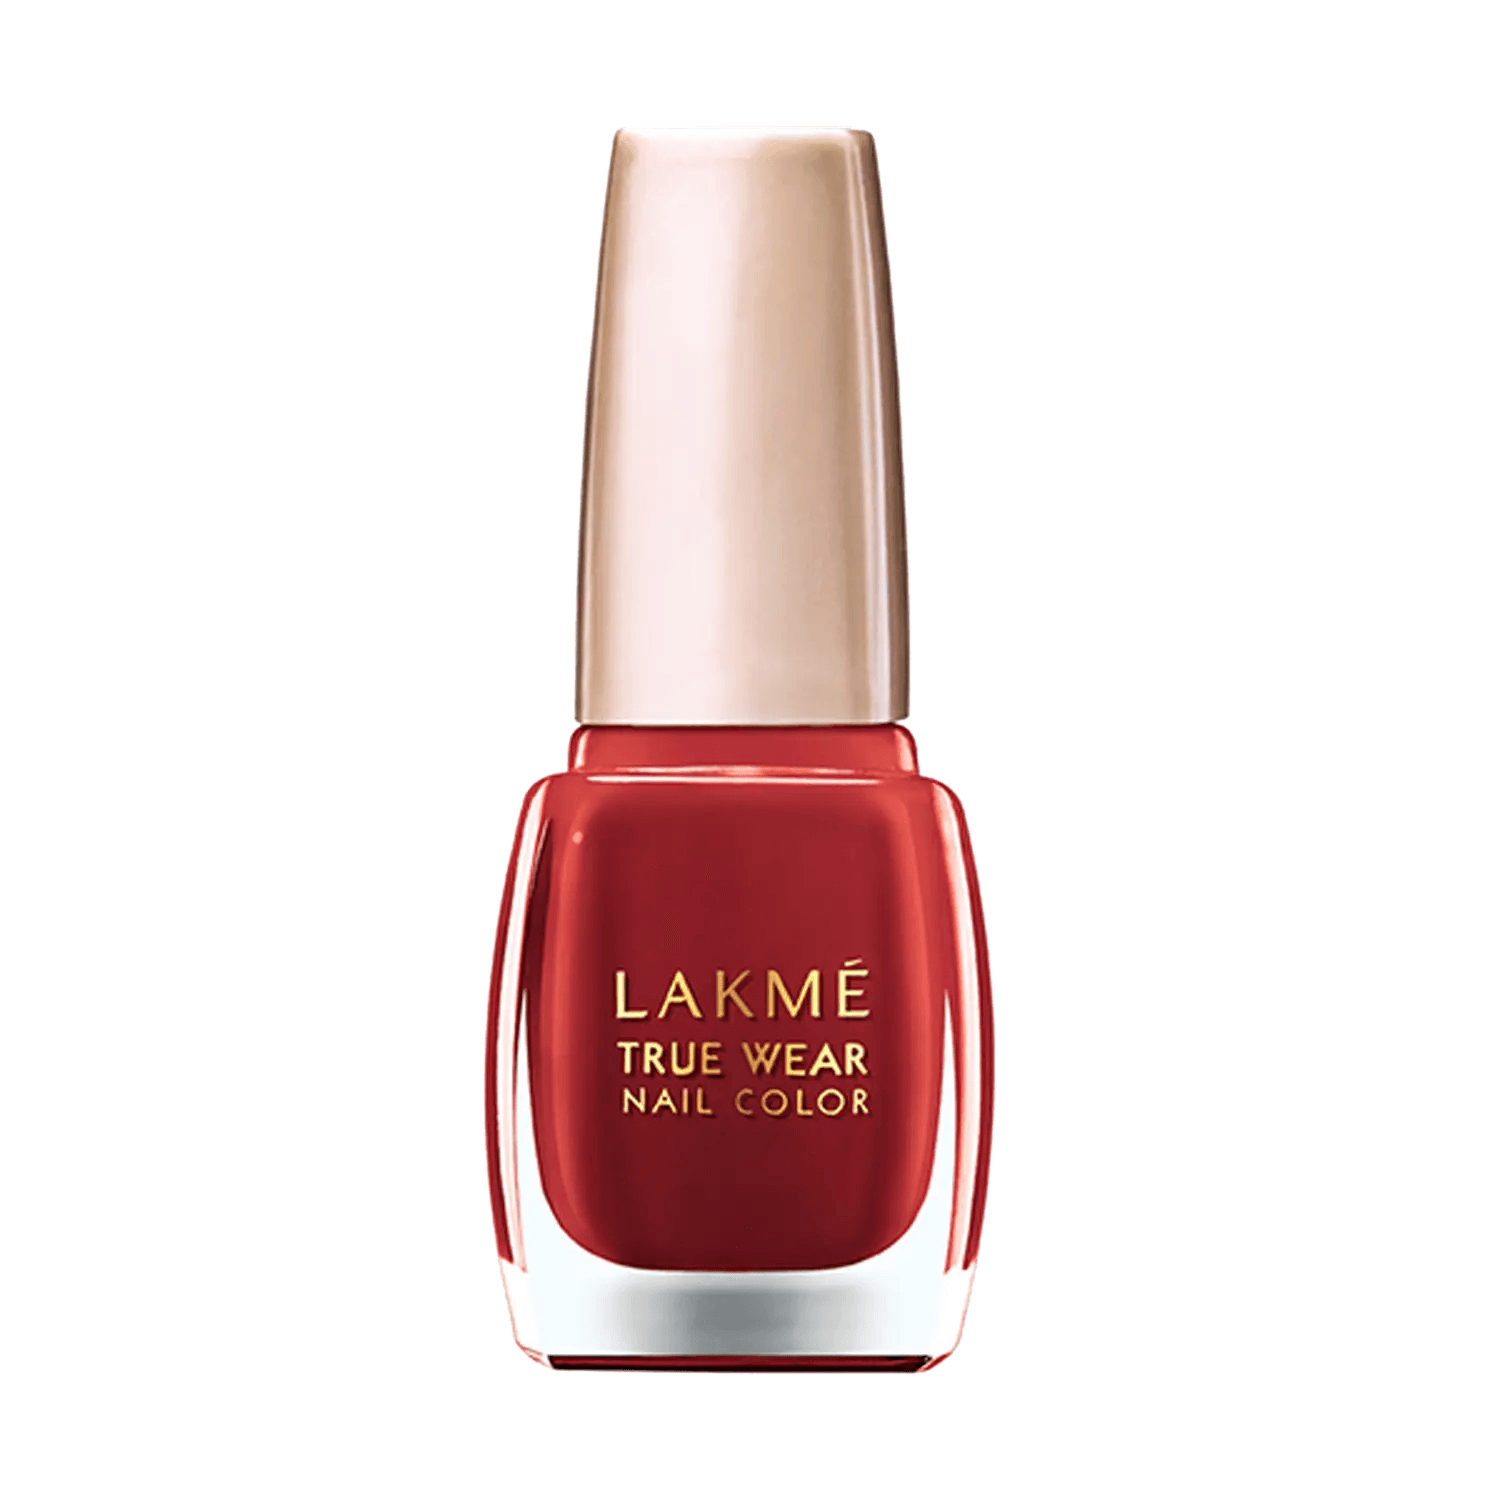 Lakme | Lakme True Wear Nail Color - 404 Reds & Maroons (9ml)